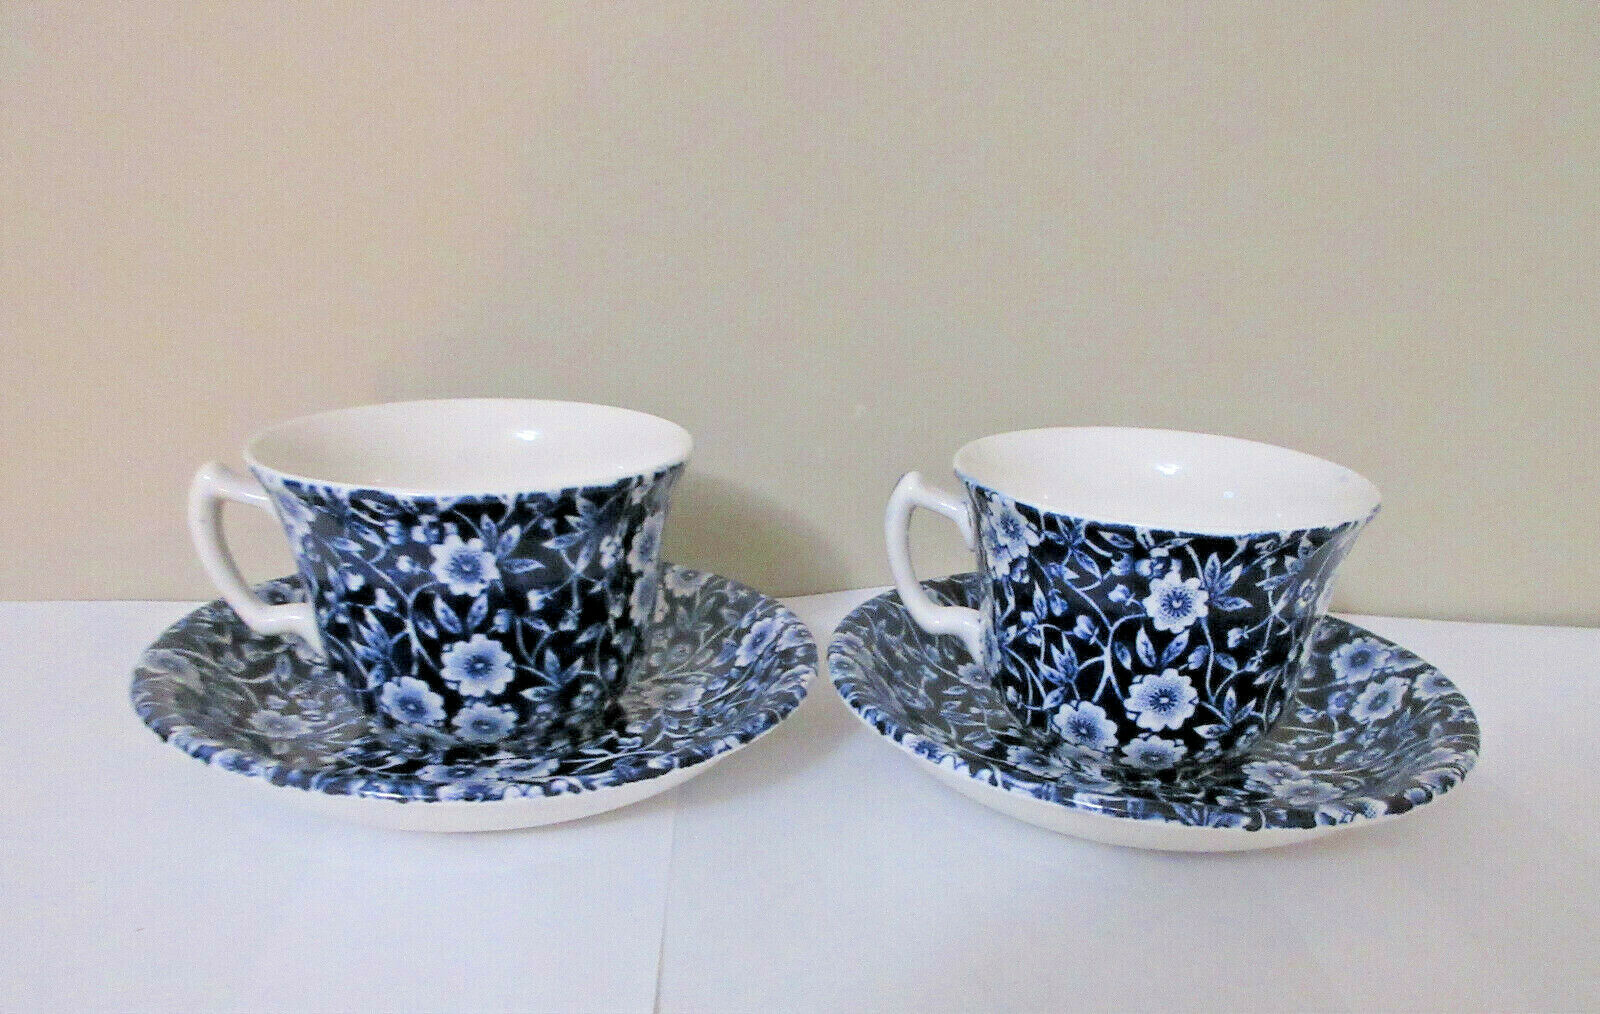 Vtg Royal Crownford Blue Calico Chintz 2 Cup & Saucer Sets England Staffordshire